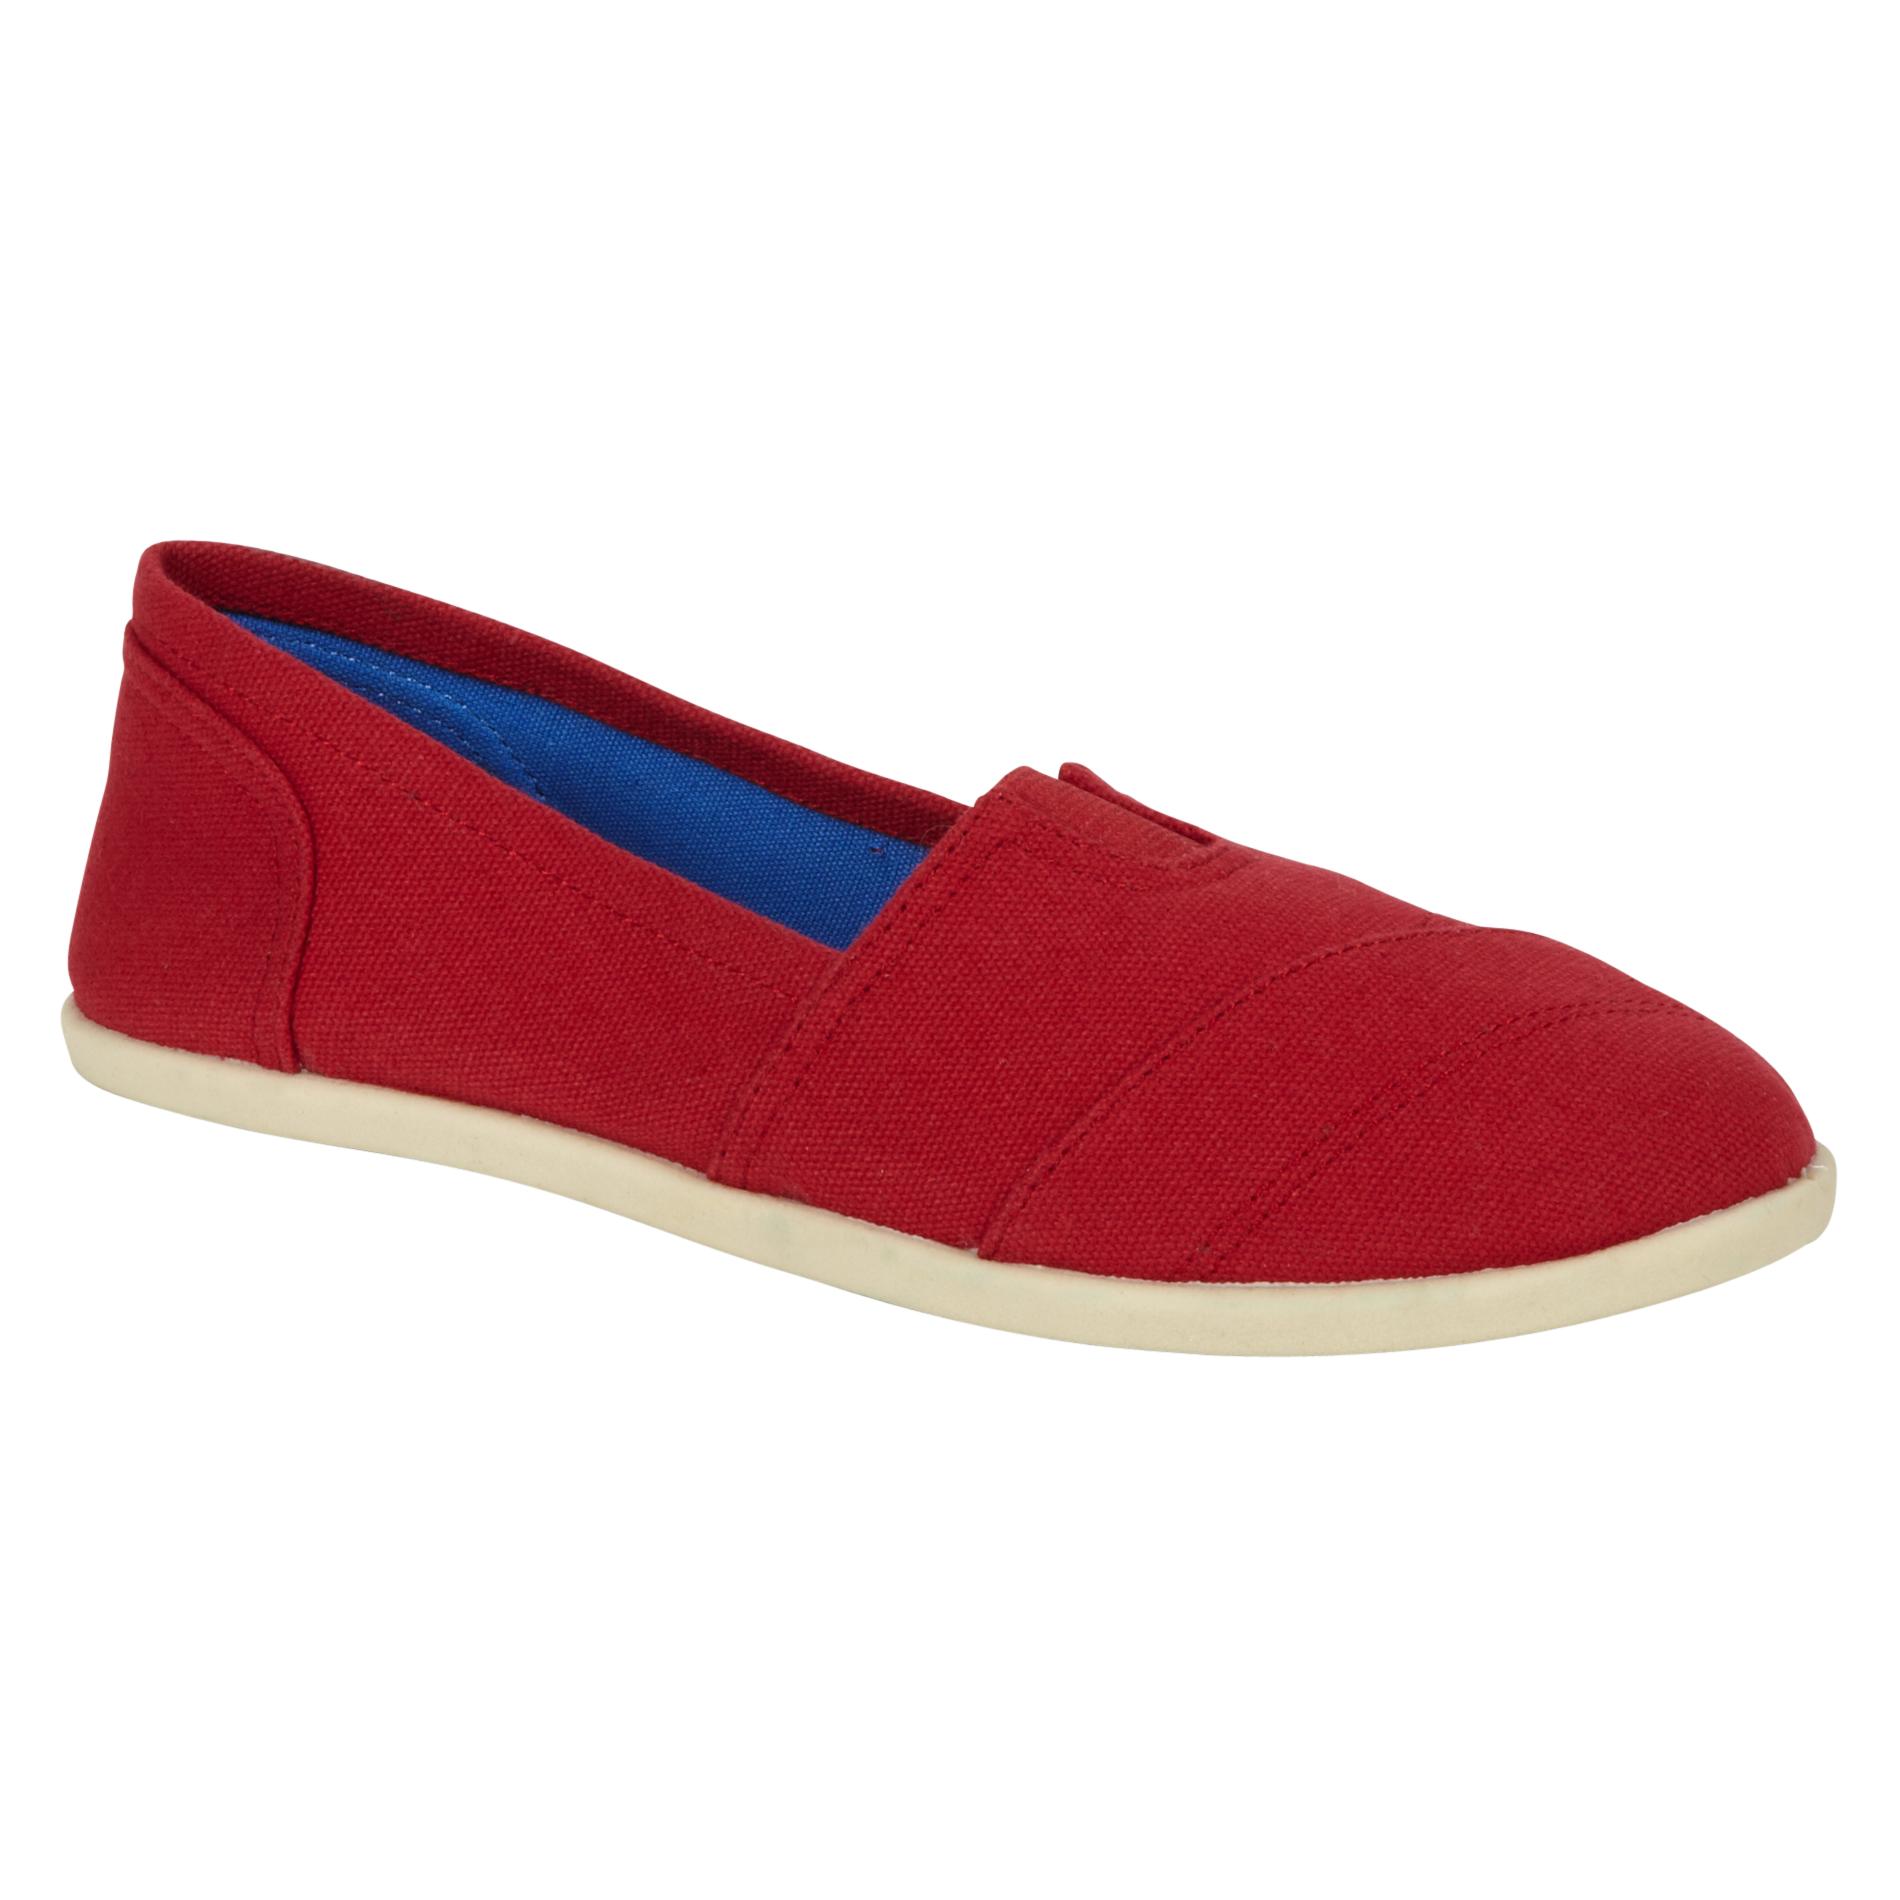 Bongo Women's Eastern Casual Canvas - Red